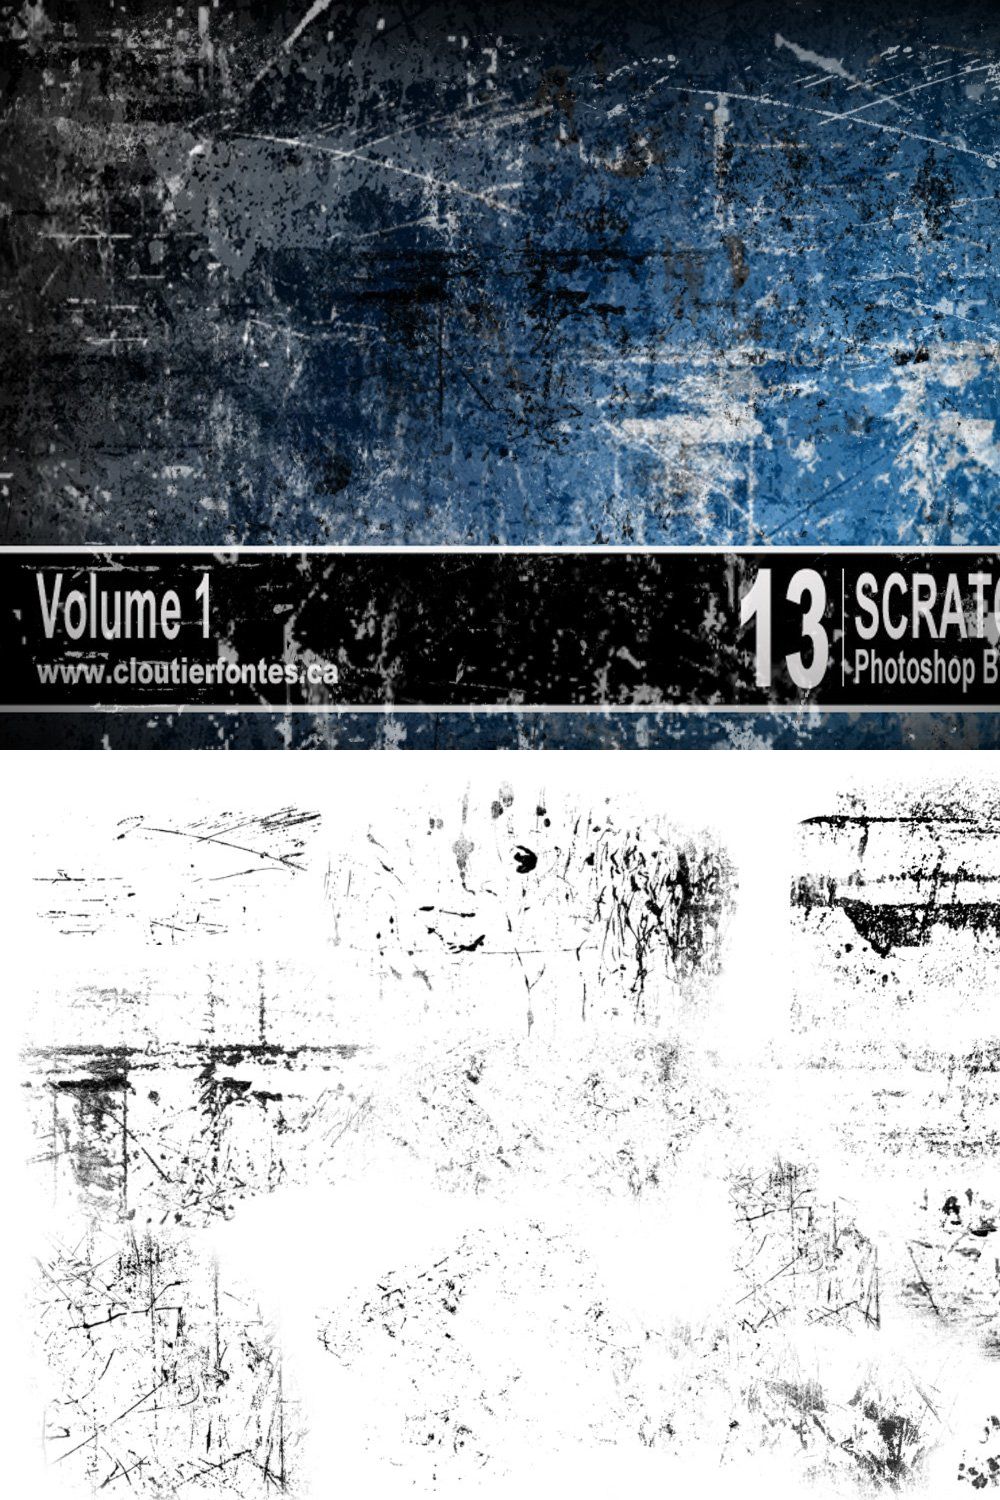 13 Grunge brushes for photoshop vol1 pinterest preview image.